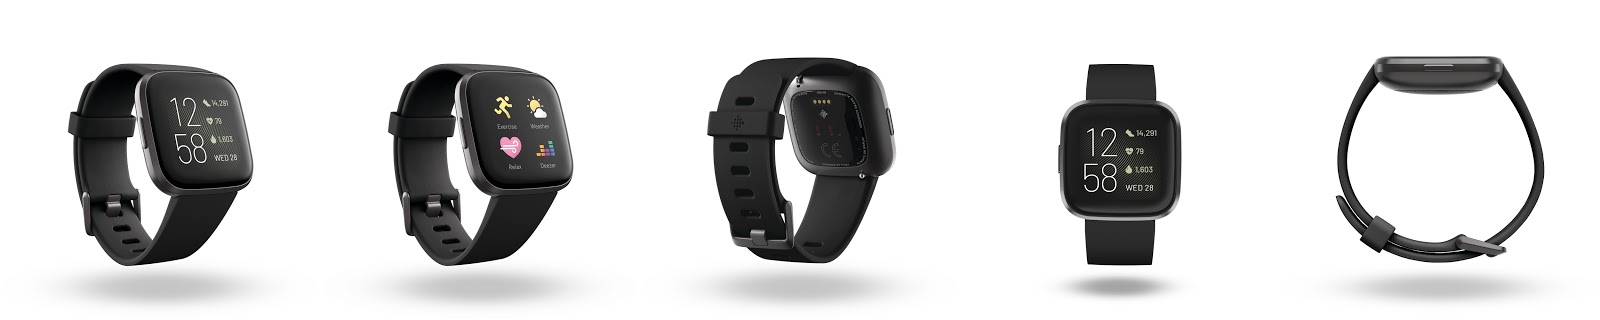 Fitbit Versa 2 Smartwatch Announced For Rs. 20,999 Along With Premium